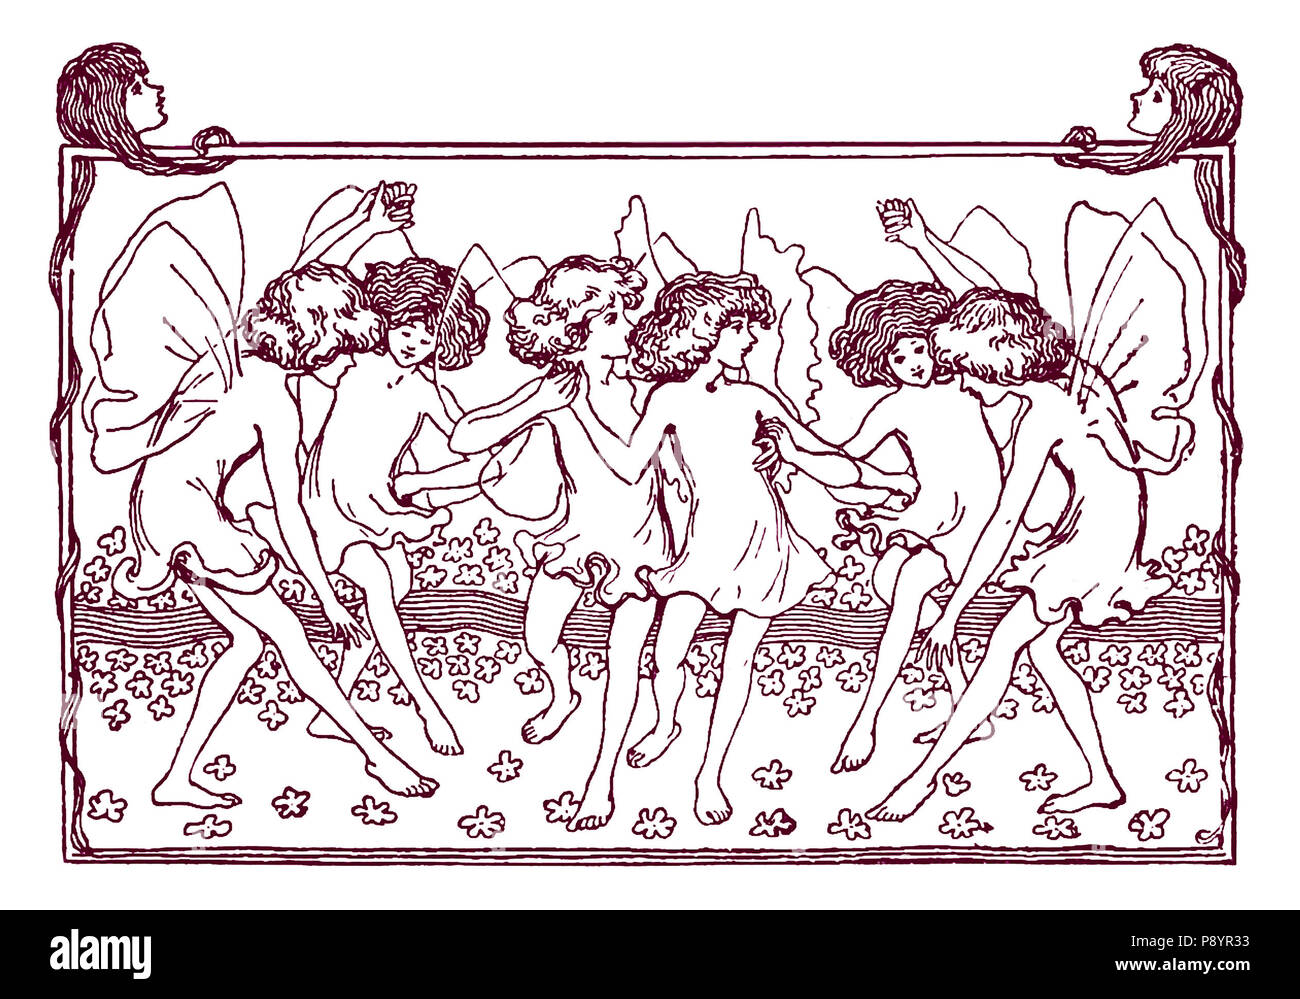 Dancing fairies with butterfly wings from 1896 illustration. Stock Photo